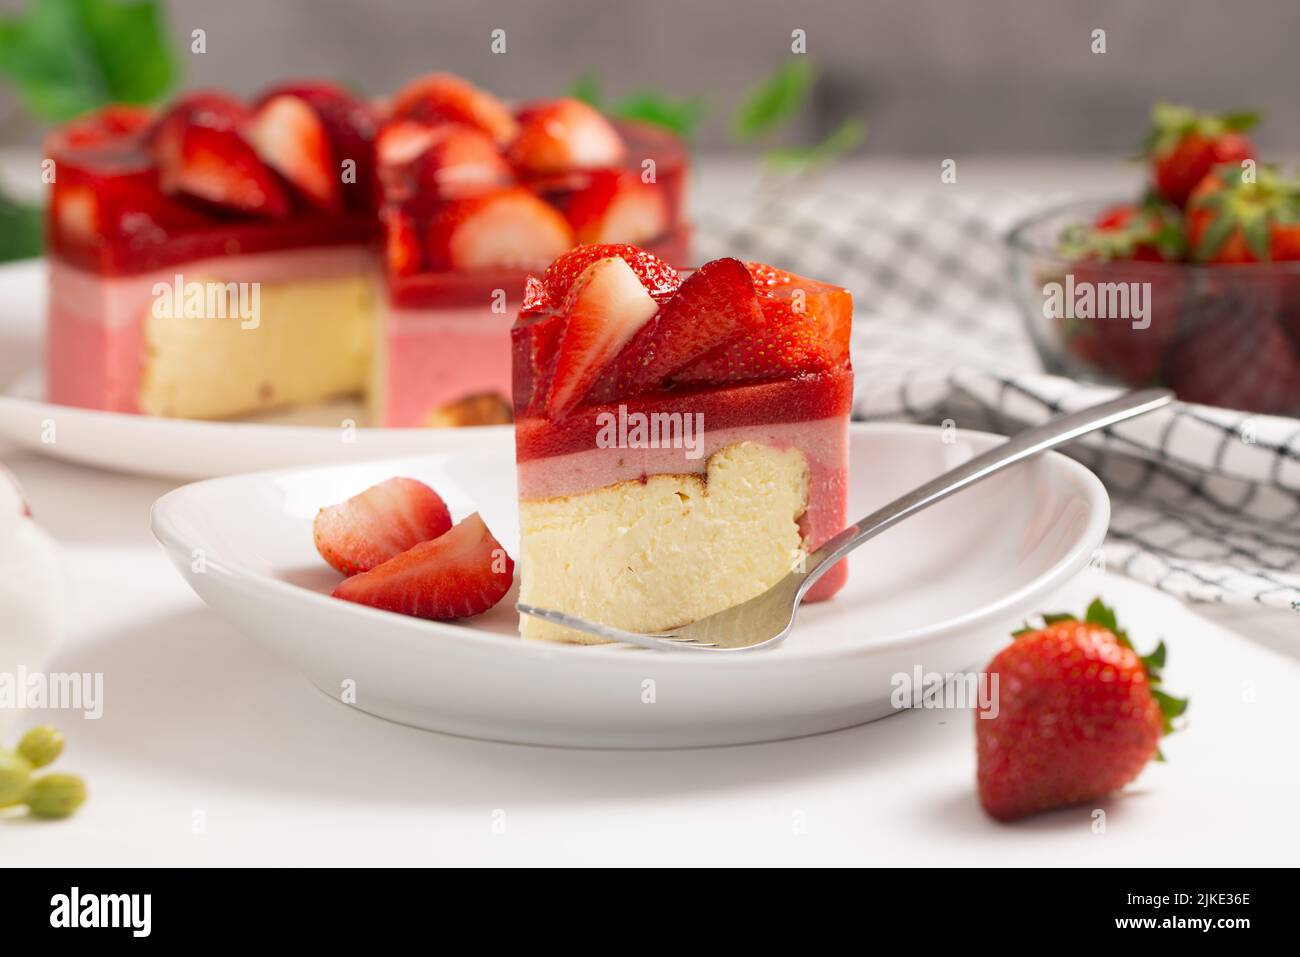 Strawberry cheesecake with jelly and fresh strawberries Stock Photo